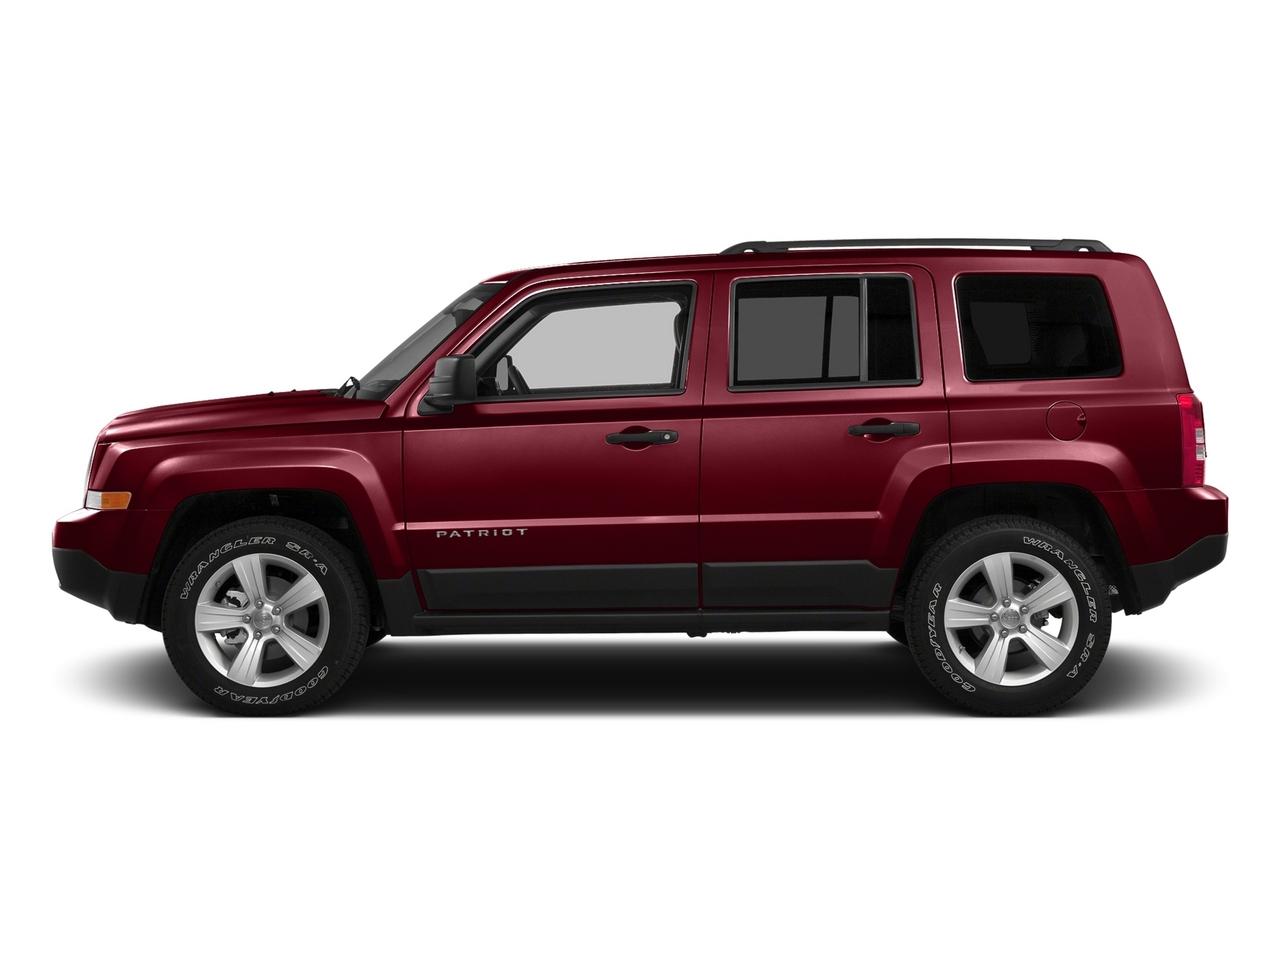 Used 2015 Jeep Patriot Latitude with VIN 1C4NJRFB0FD269603 for sale in Virginia, Minnesota